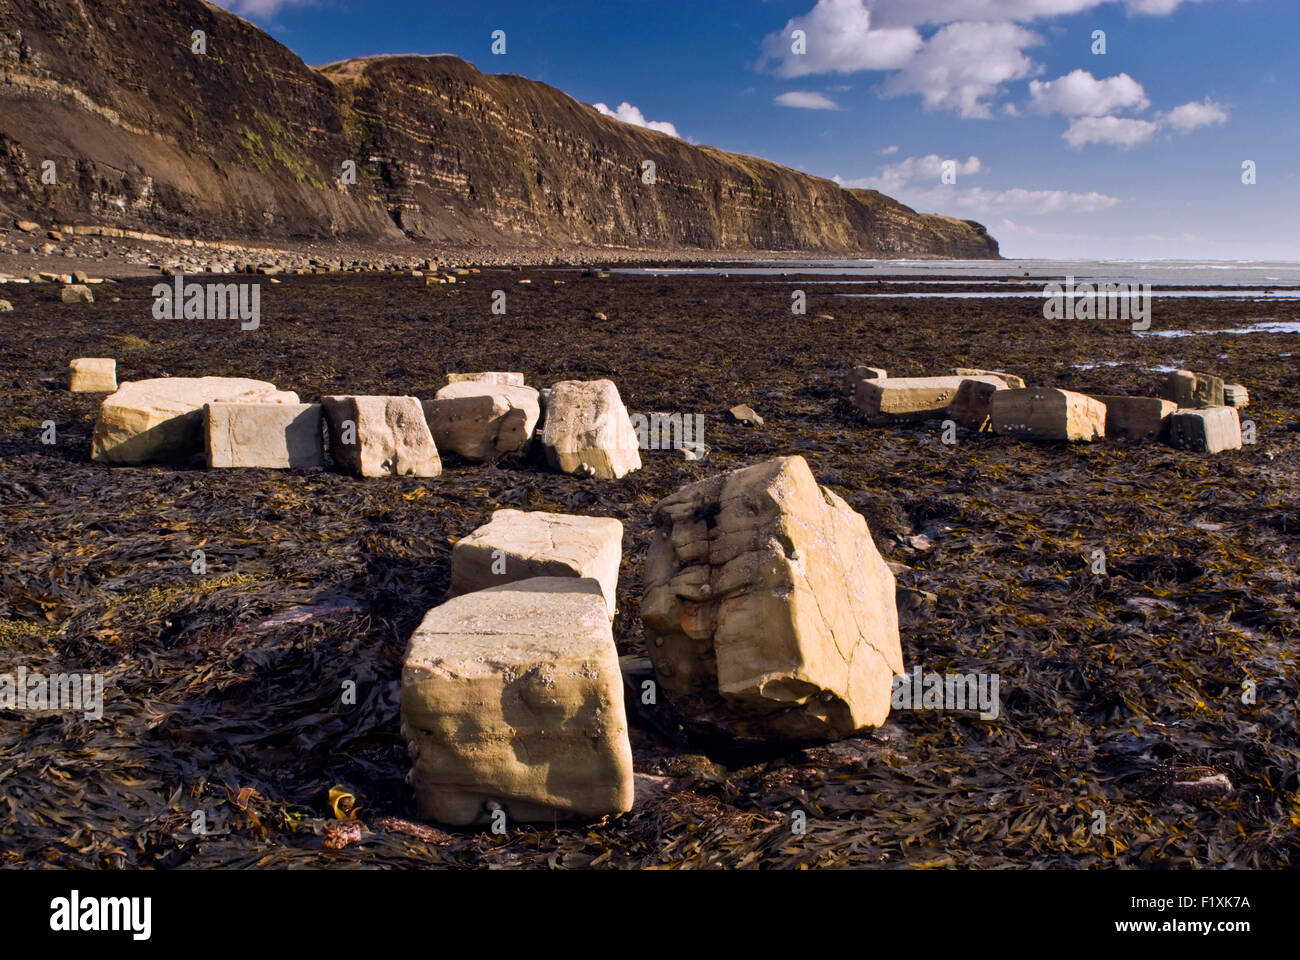 Limestone boulders on the sea weed covered ledges at Kimmeridge during low tide on Dorset's Jurassic Coast, England UK Stock Photo